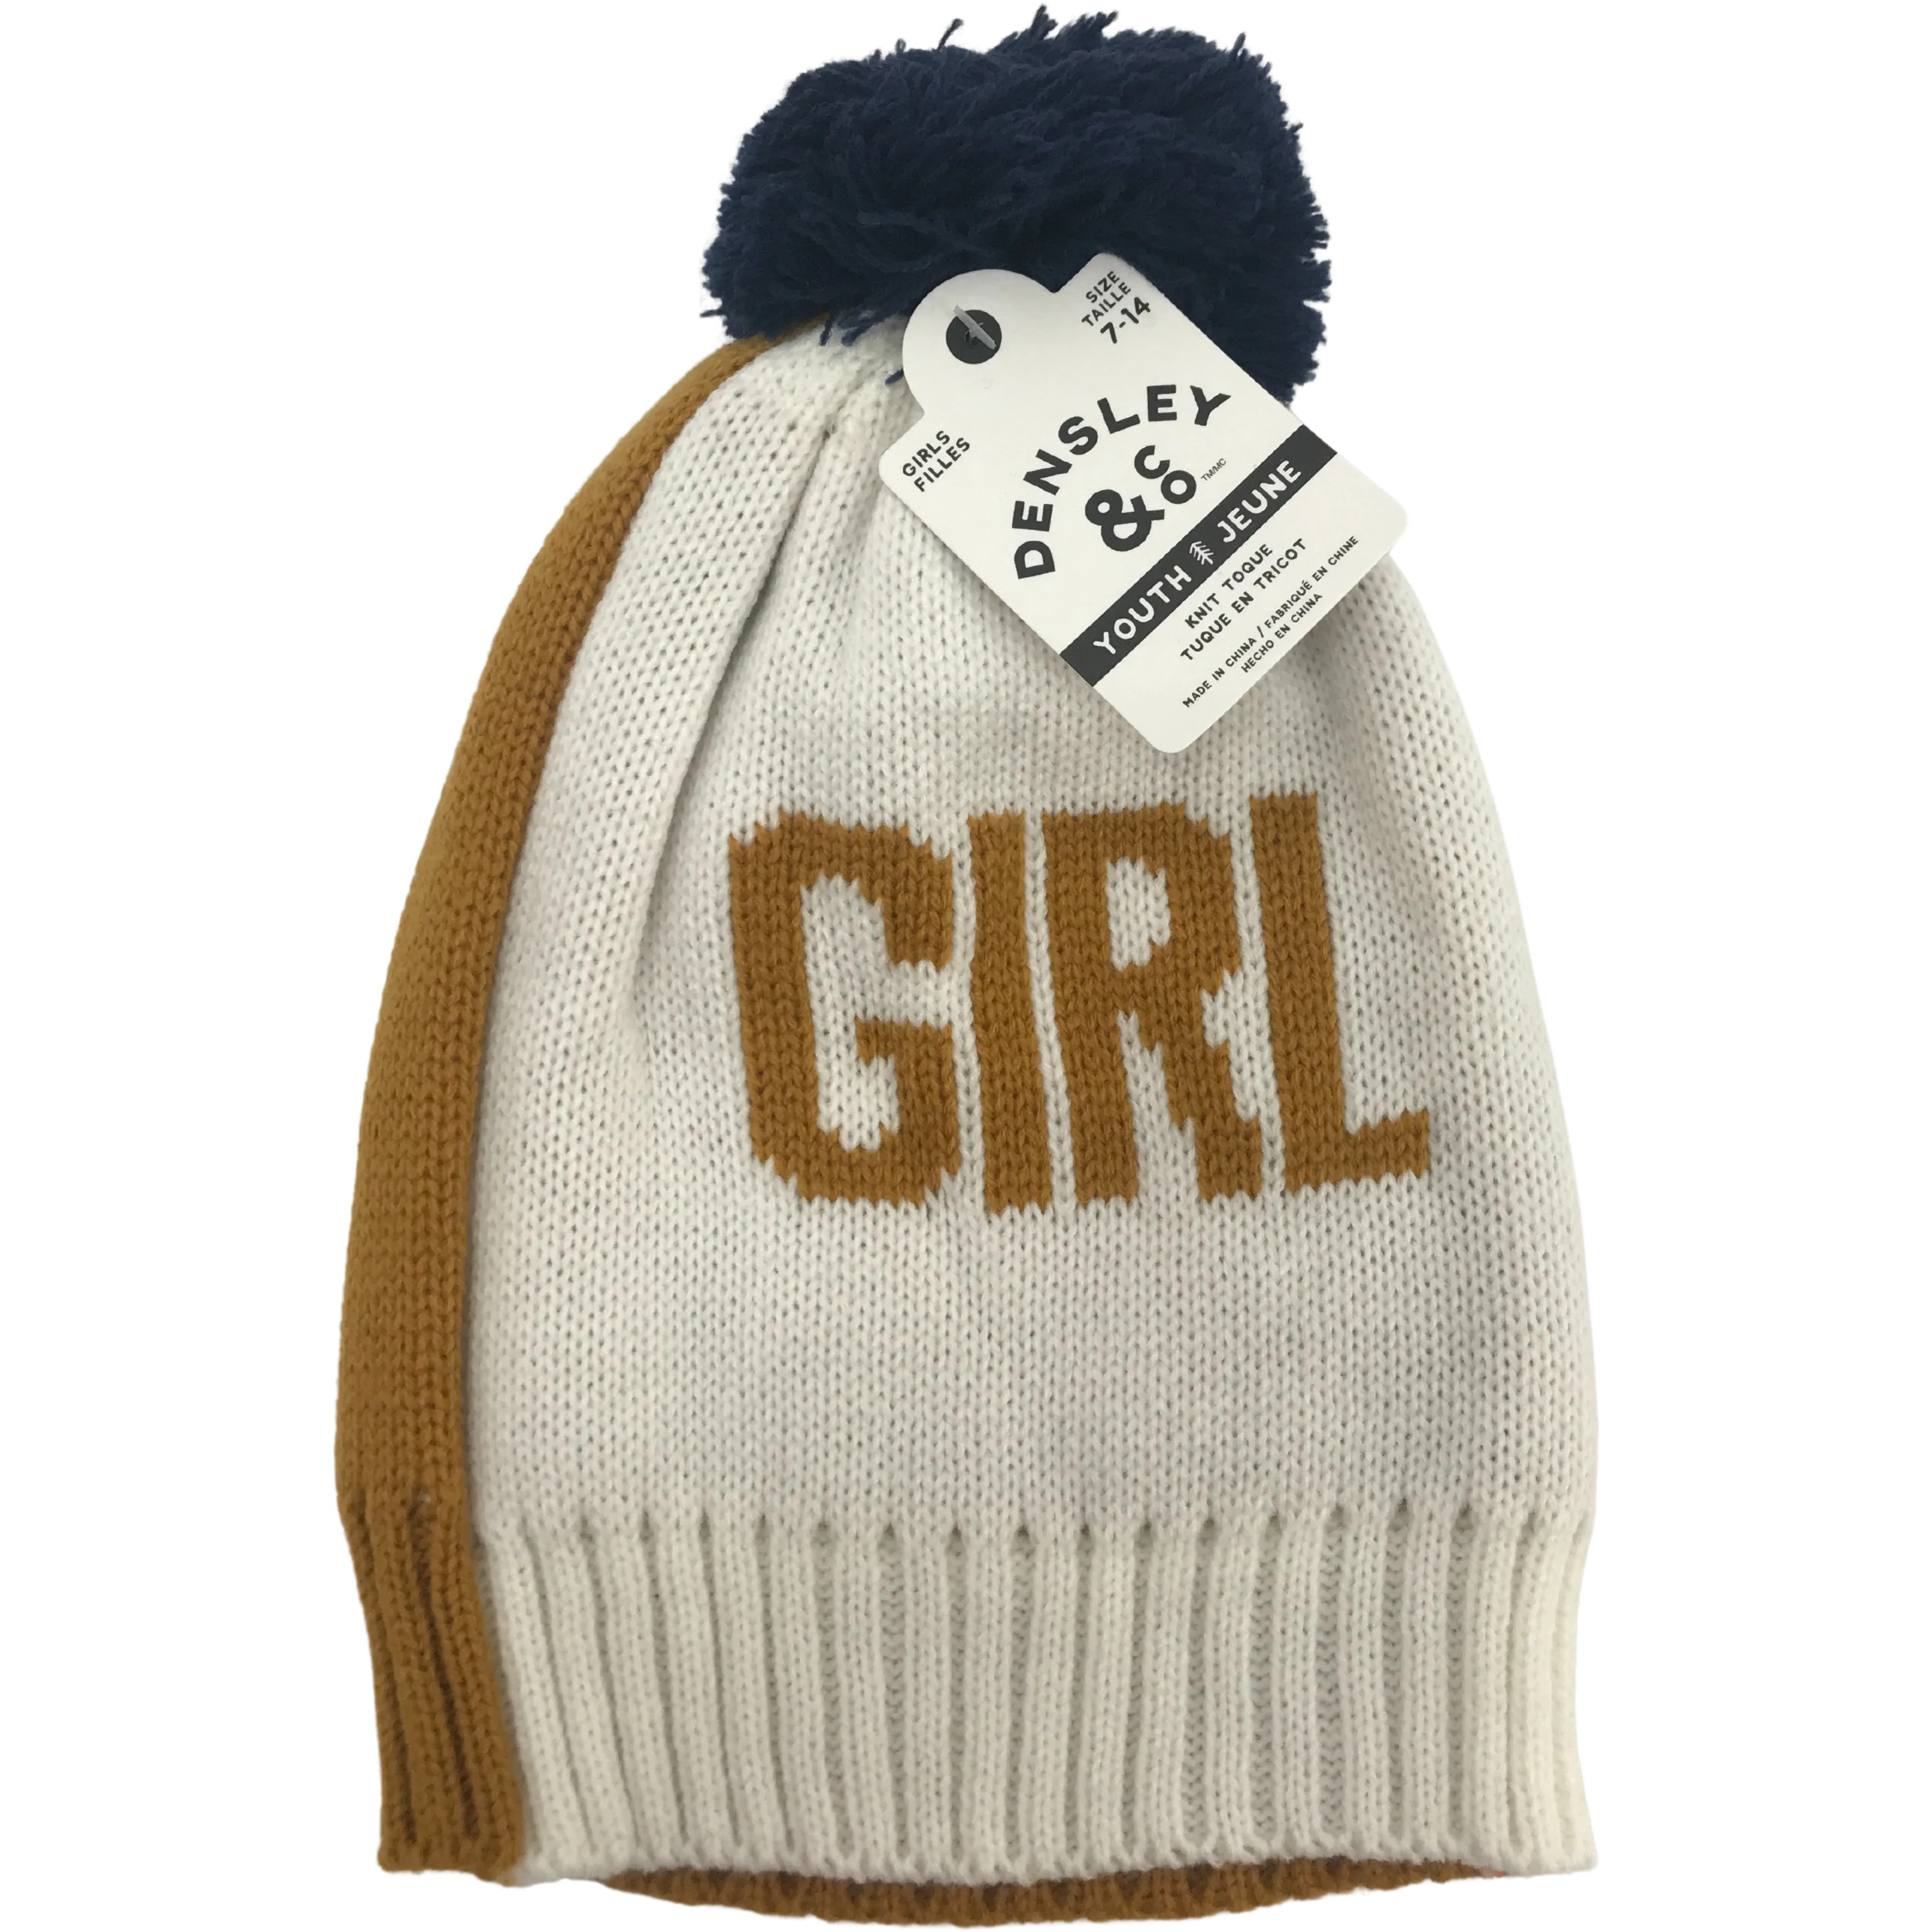 Densley & Co Girl's Youth Knit Hat / Winter Hat / Winter Toque / Mustard, White & Blue